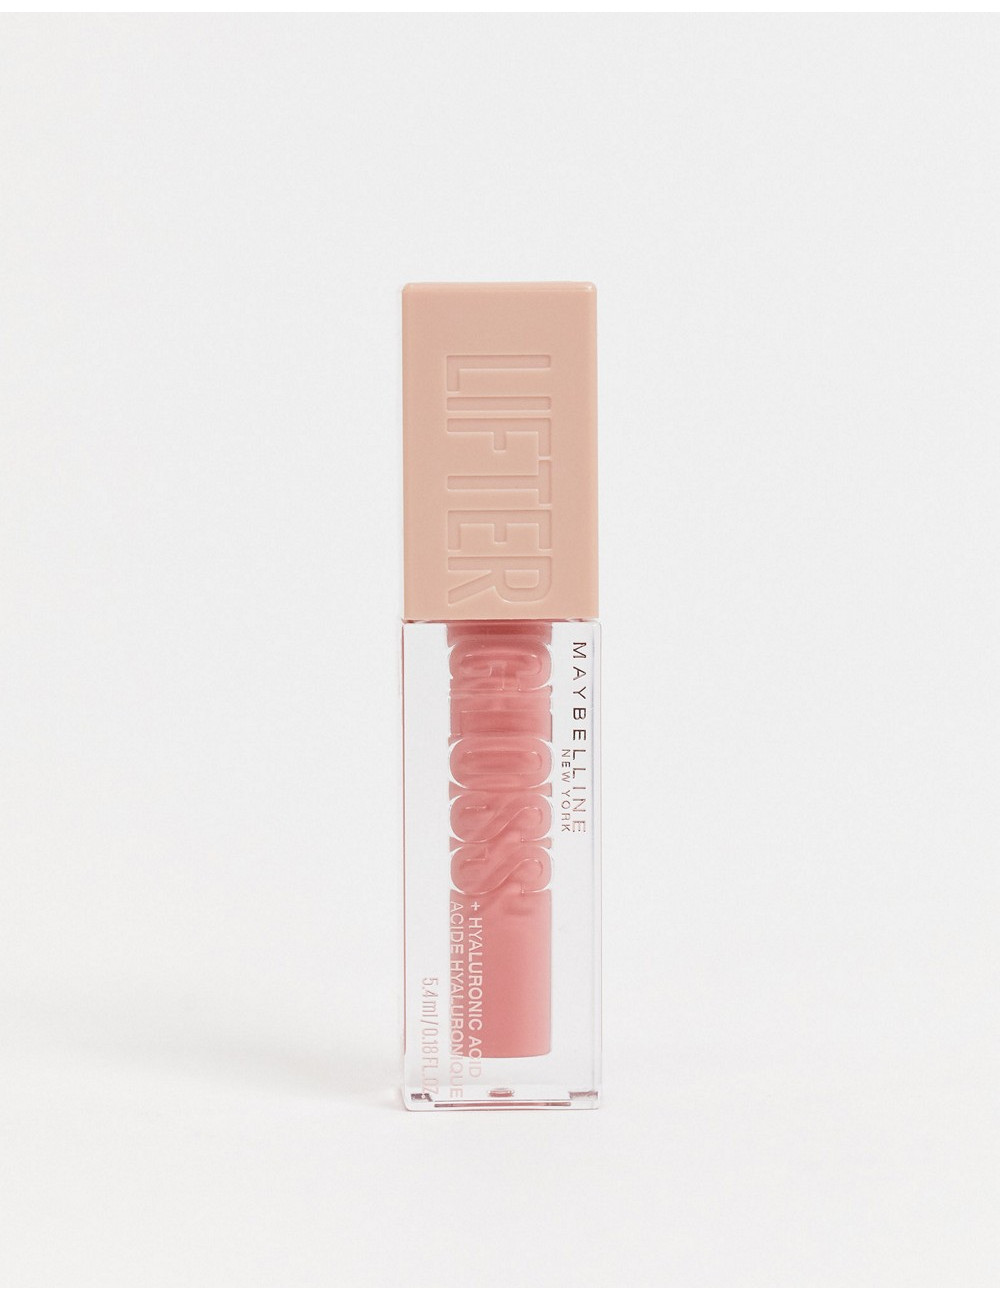 Maybelline Lifter Gloss...